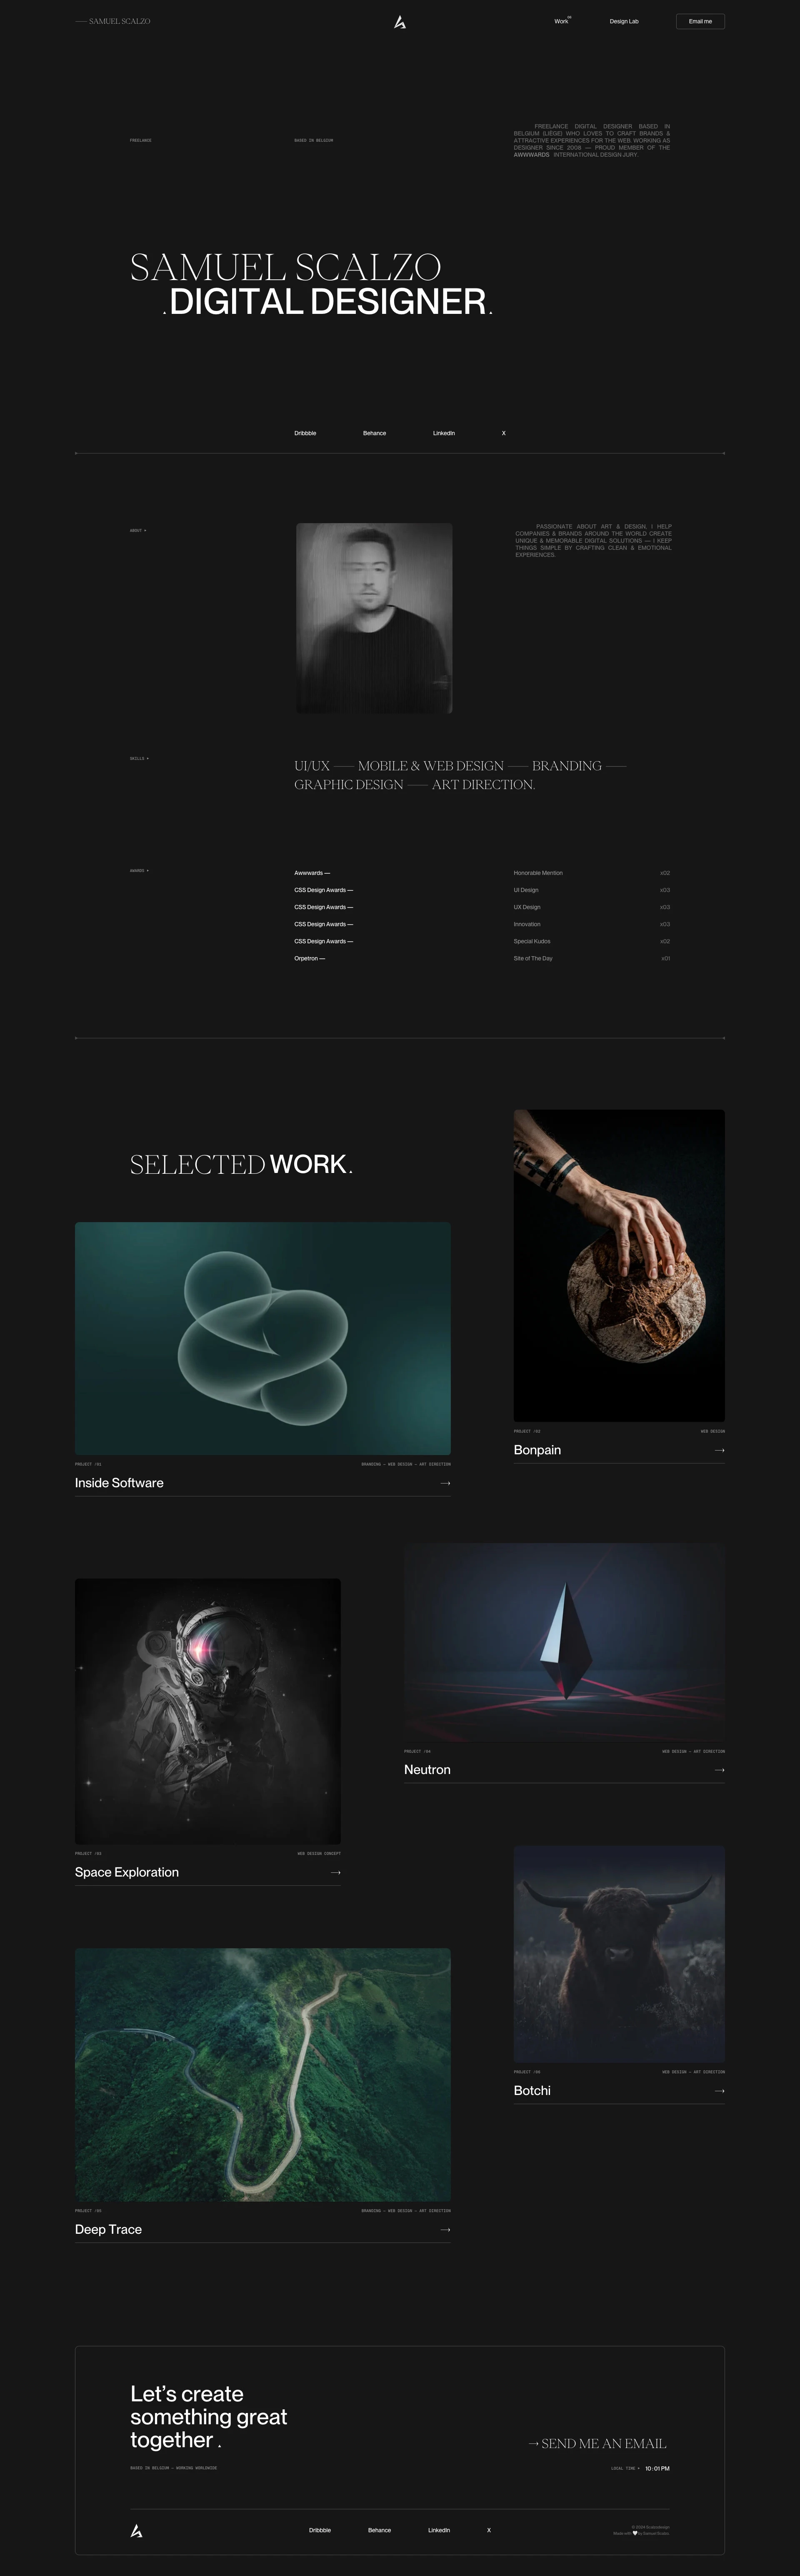 Samuel Scalzo Landing Page Example: Freelance digital designer based in Belgium who loves to craft brands & attractive experiences for the web.